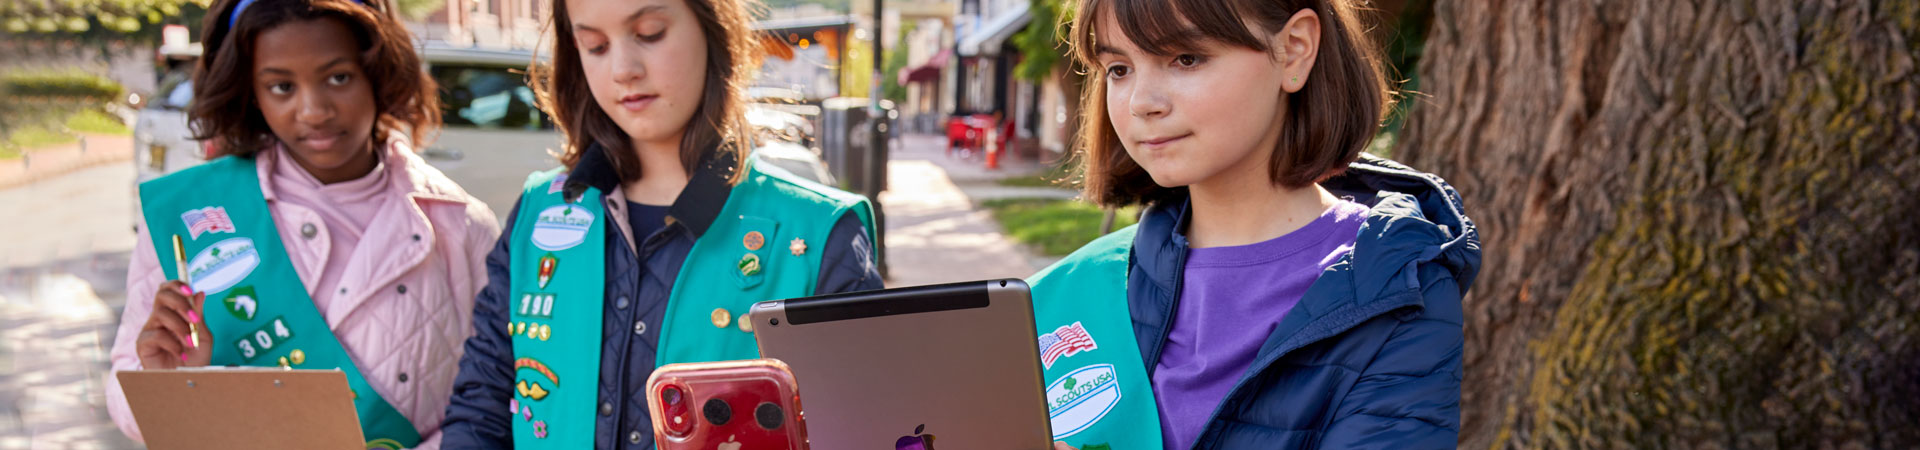  Three Girl Scouts wearing green vests decorated with pins and badges are standing outside. One is holding a clipboard and another is holding an ipad. A hand holds up a red iphone to the Girl Scout with the ipad.  